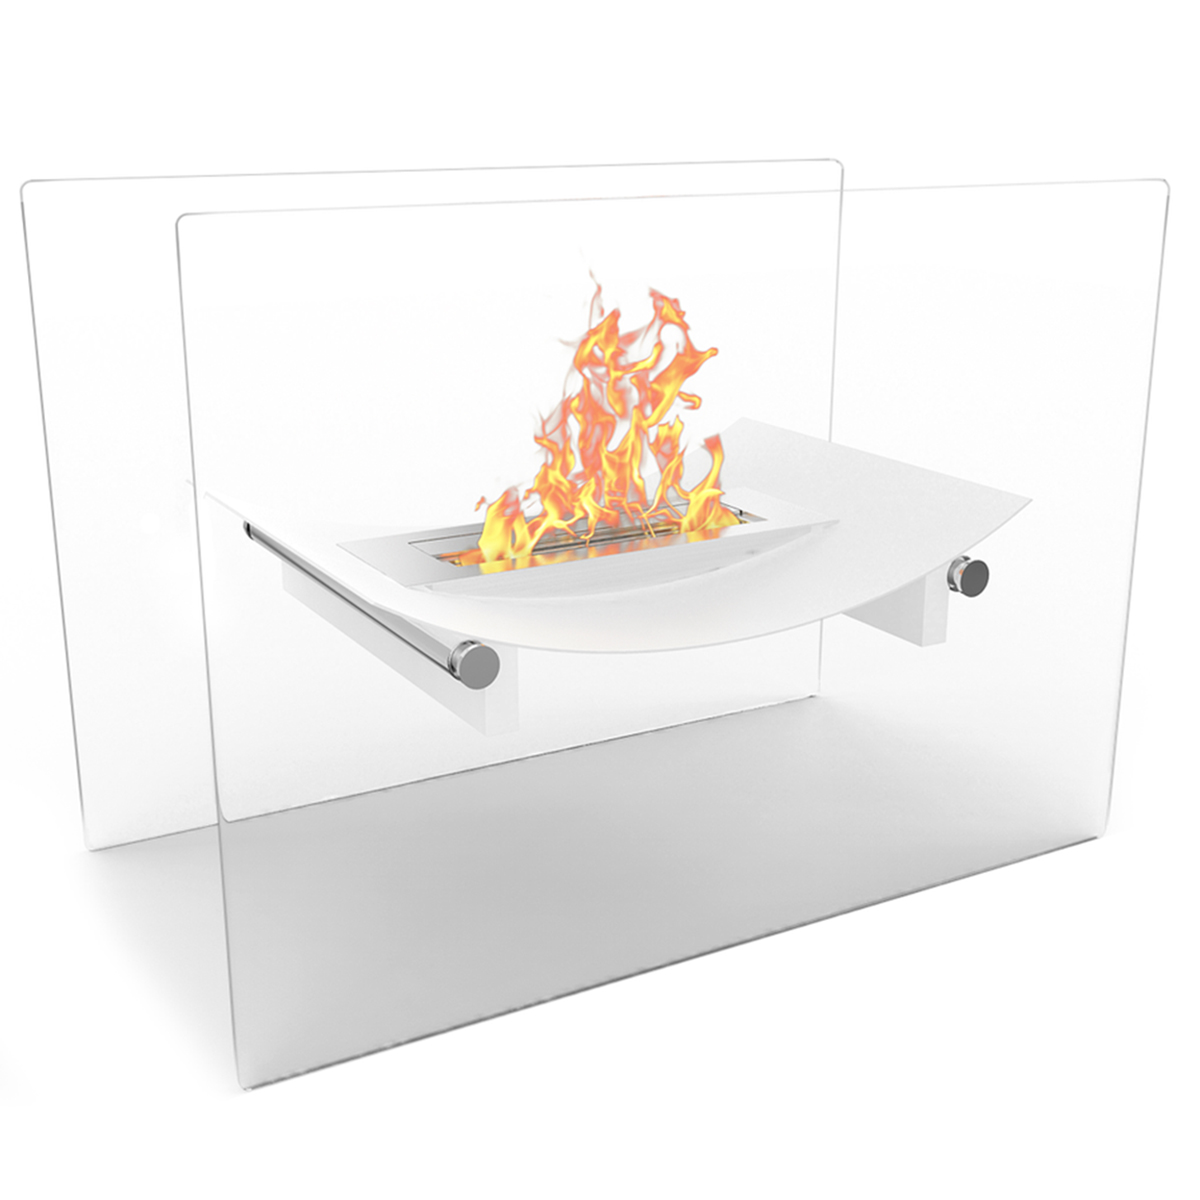 Ef6007w-mf Bow Ventless Free Standing Ethanol Fireplace, White